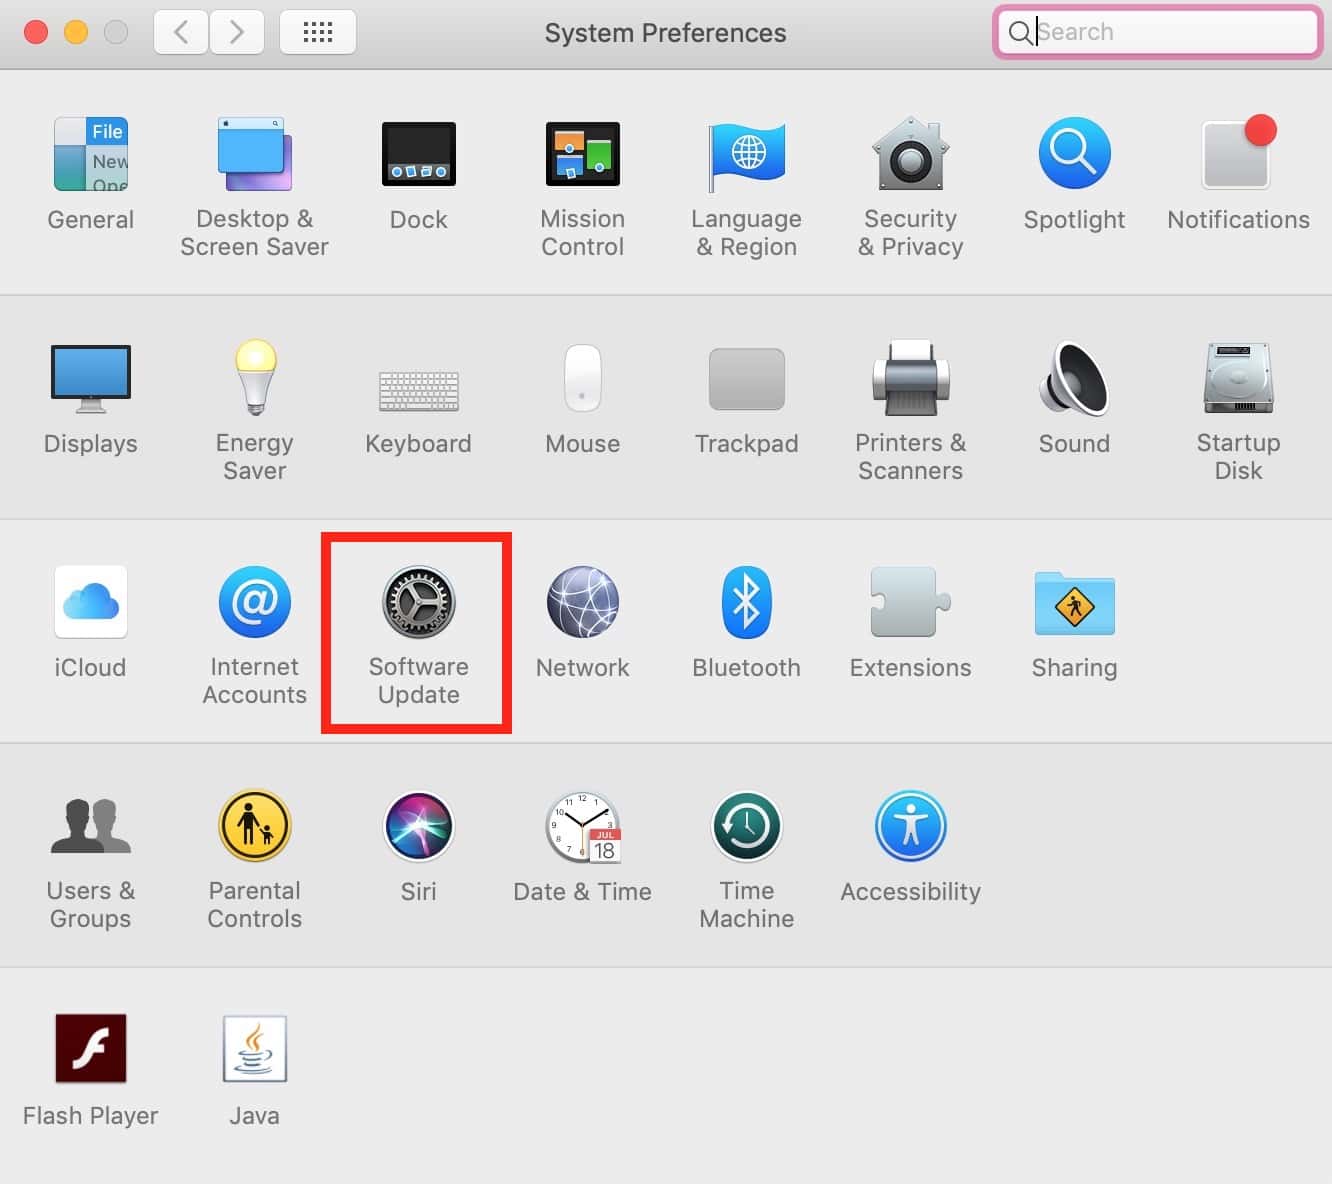 Software Update in System Preferences in macOS Mojave